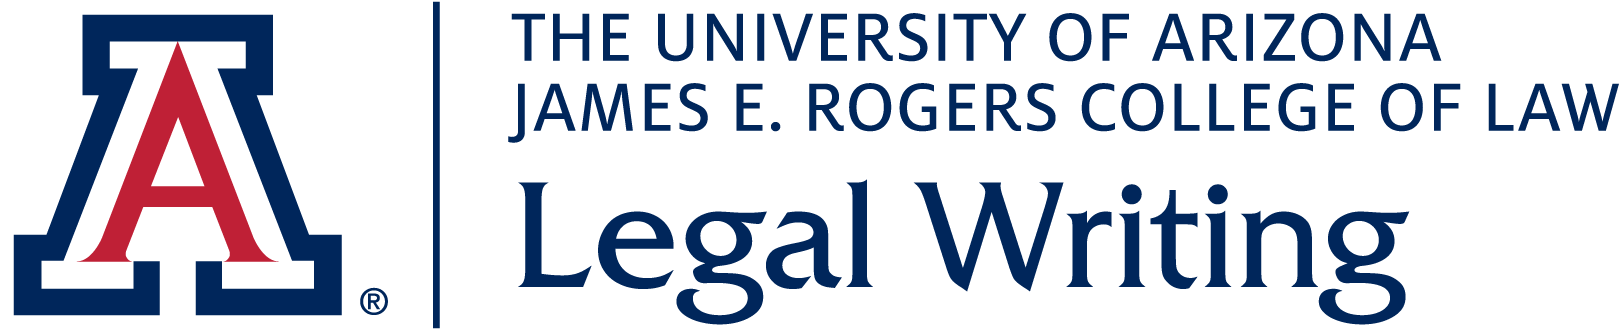 James E. Rogers College of Law Legal Writing | Home